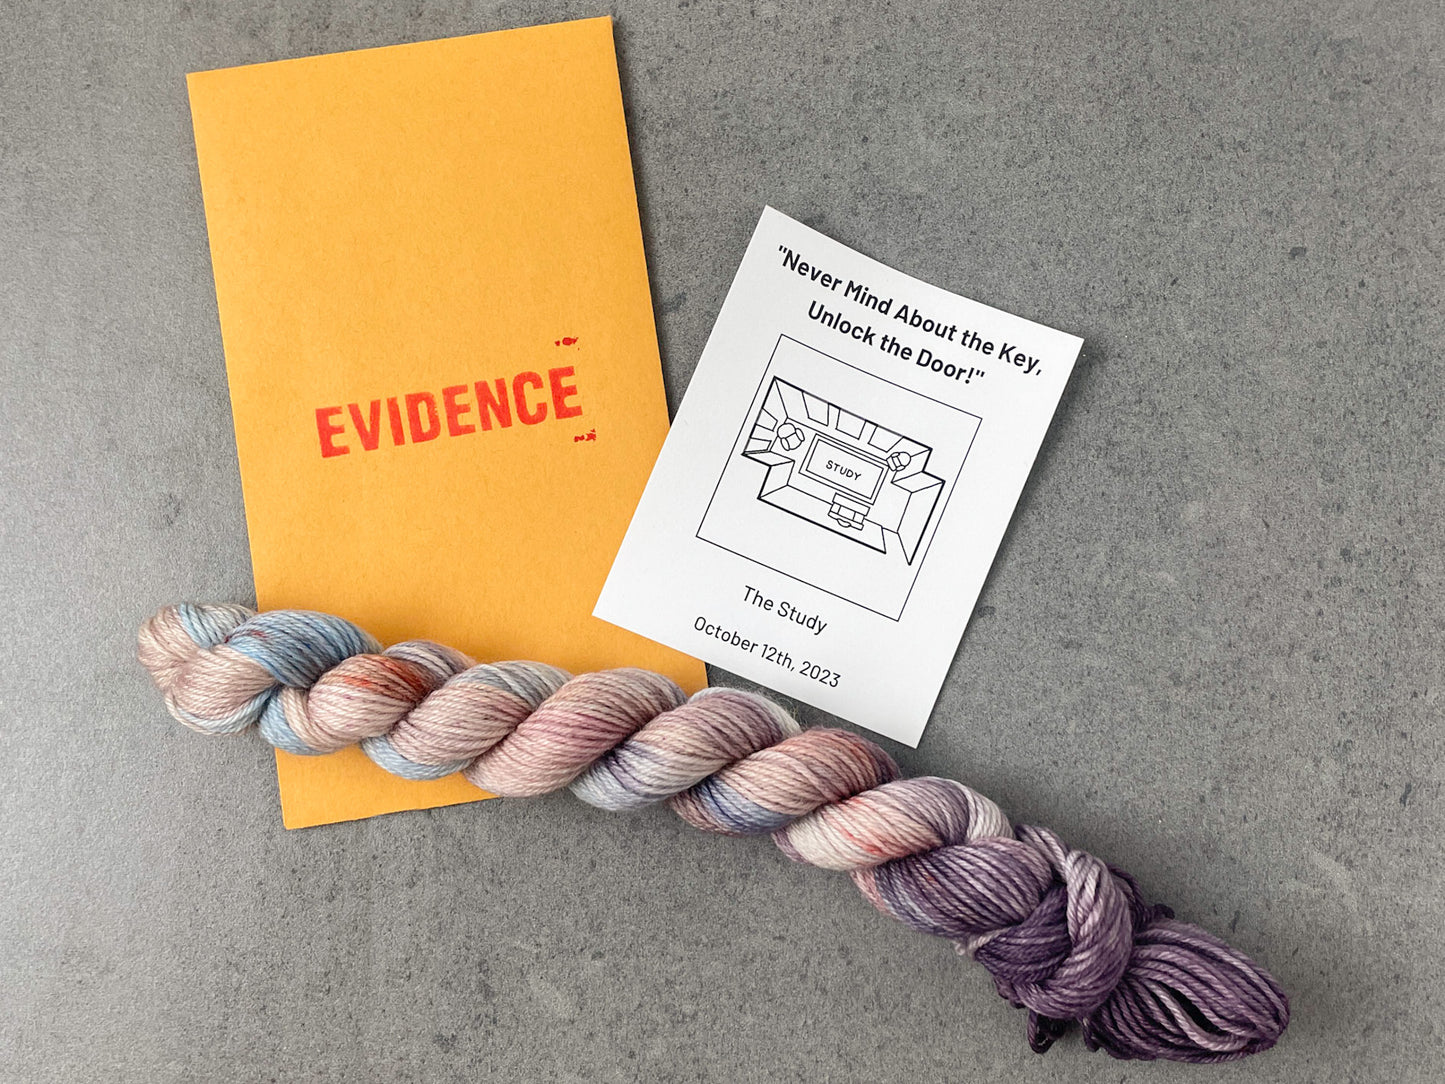 A skein of pastel pink, blue, and purple yarn on top of an envelope stamped with "Evidence" and a card with a drawing of the study on it.